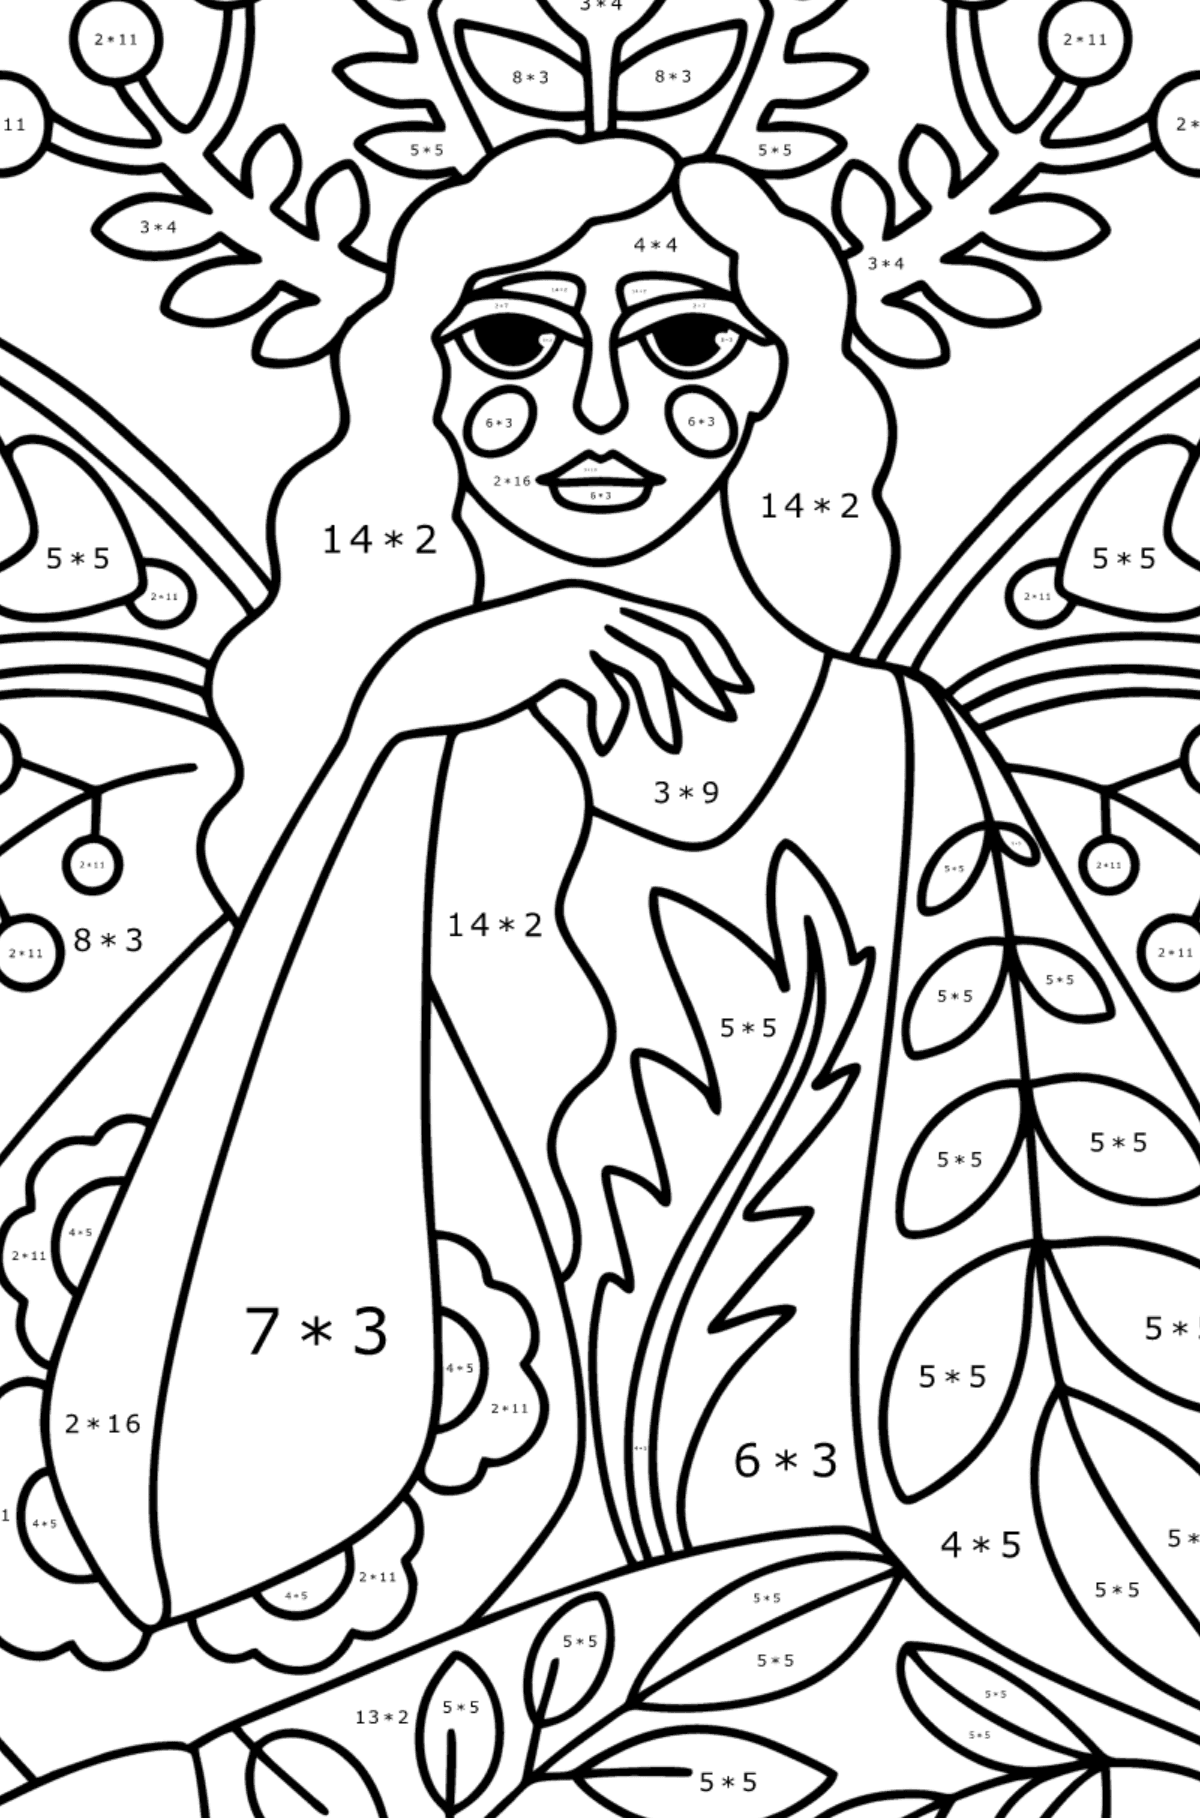 Fairy Tattoo (difficult) coloring page - Math Coloring - Multiplication for Kids